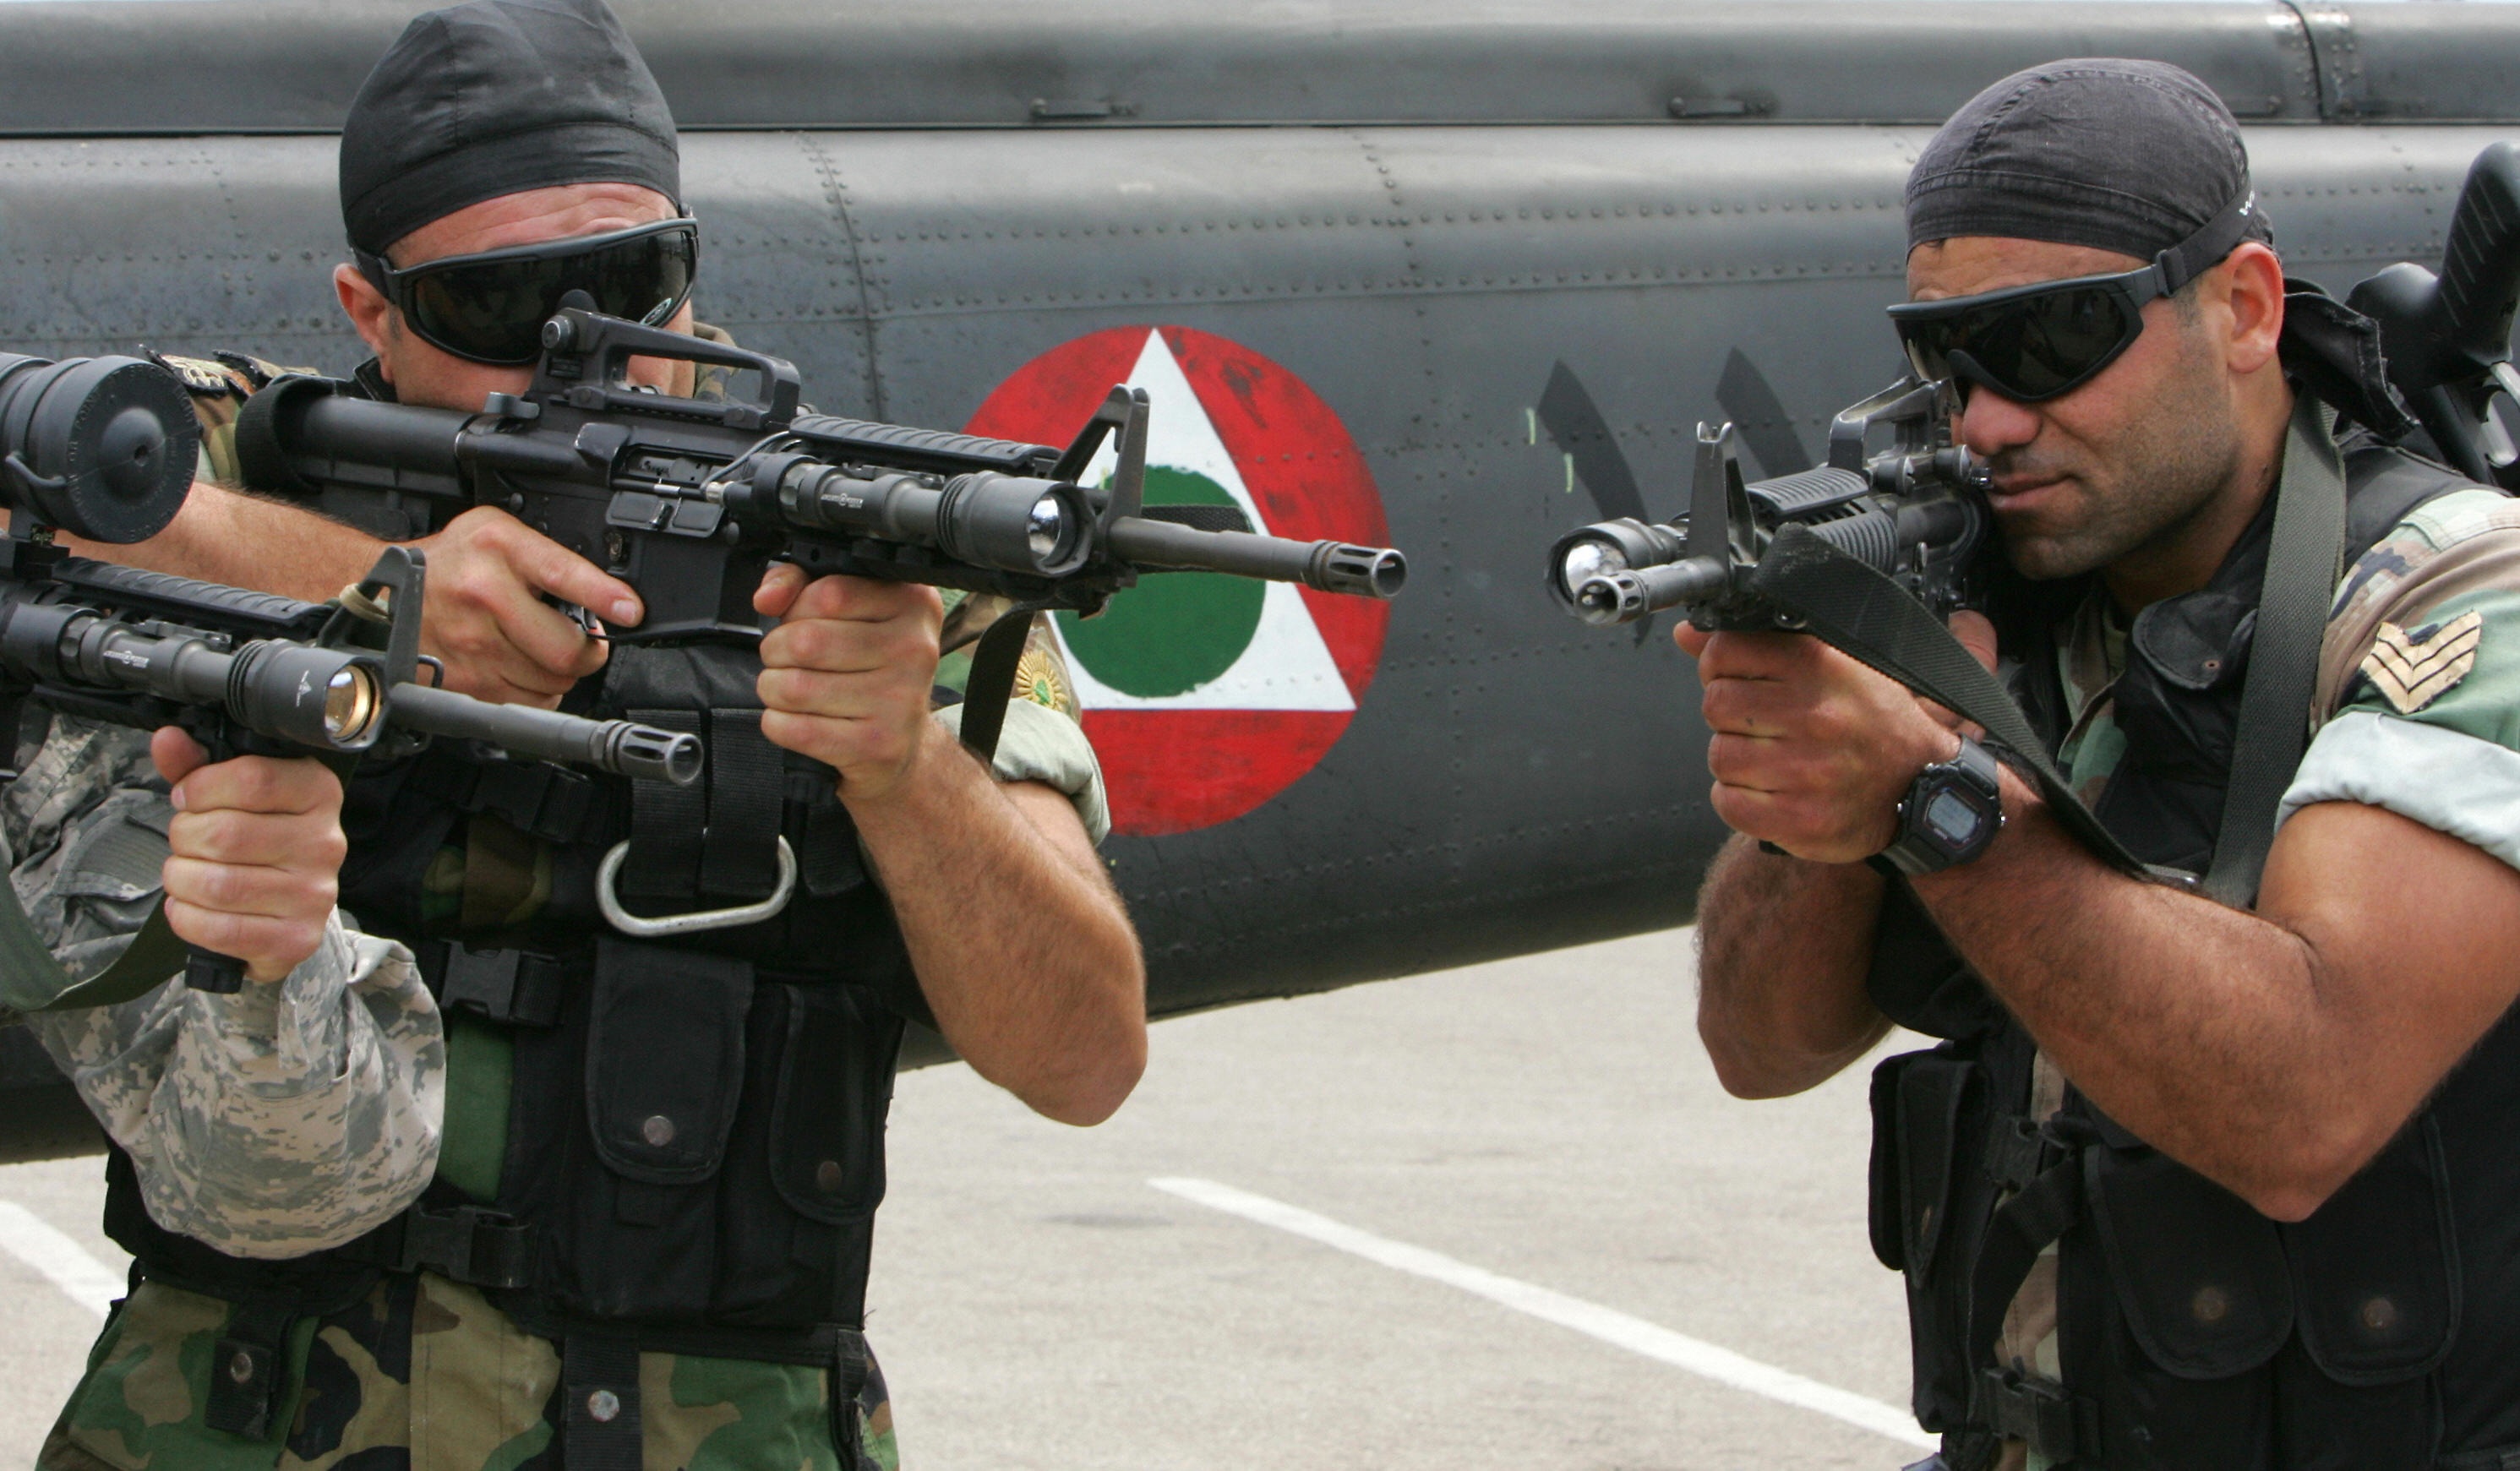 ANWAR AMRO/AFP/Getty Images. Lebanese Special Forces display their combat skills at the opening ceremony of the Security Middle East show in Beirut on April 20, 2009. The show, which ends on April 22, is a regional arms exhibition being staged in Lebanon for the first time.